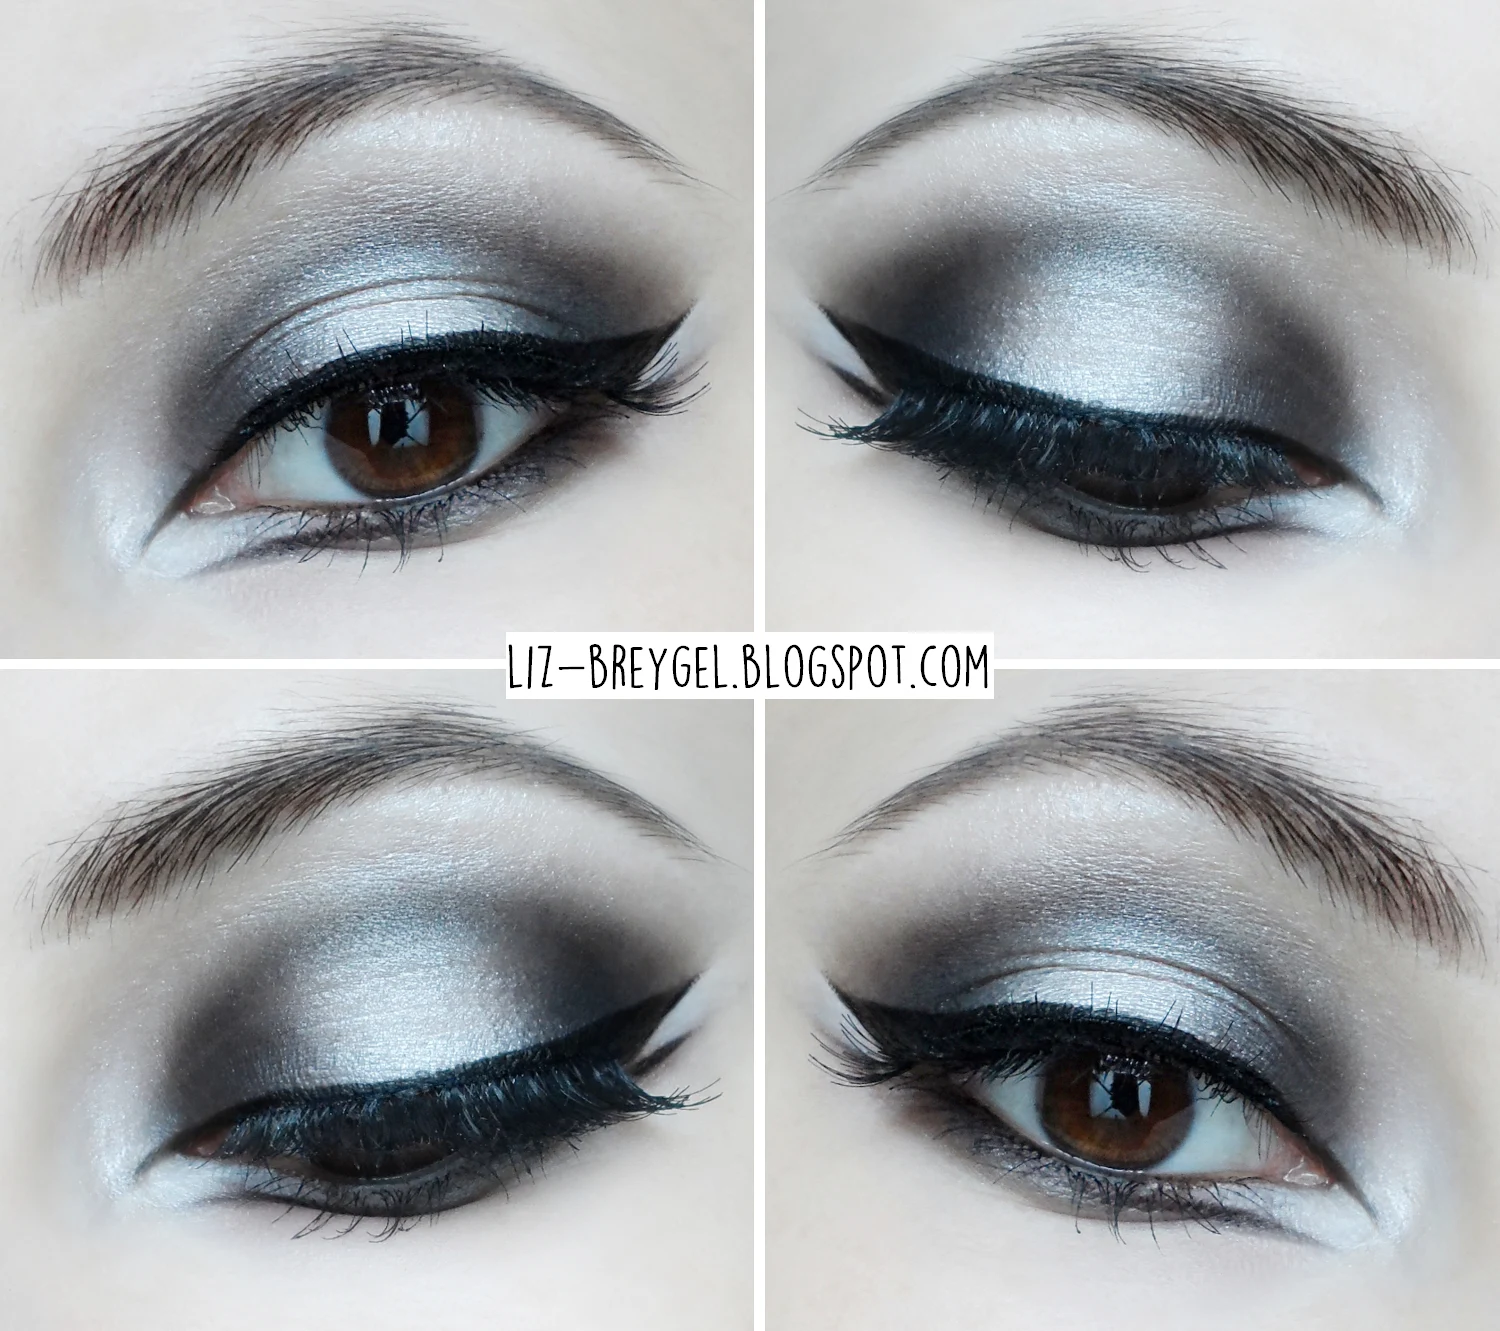 a close-up picture of an eye with dramatic Gothic makeup look